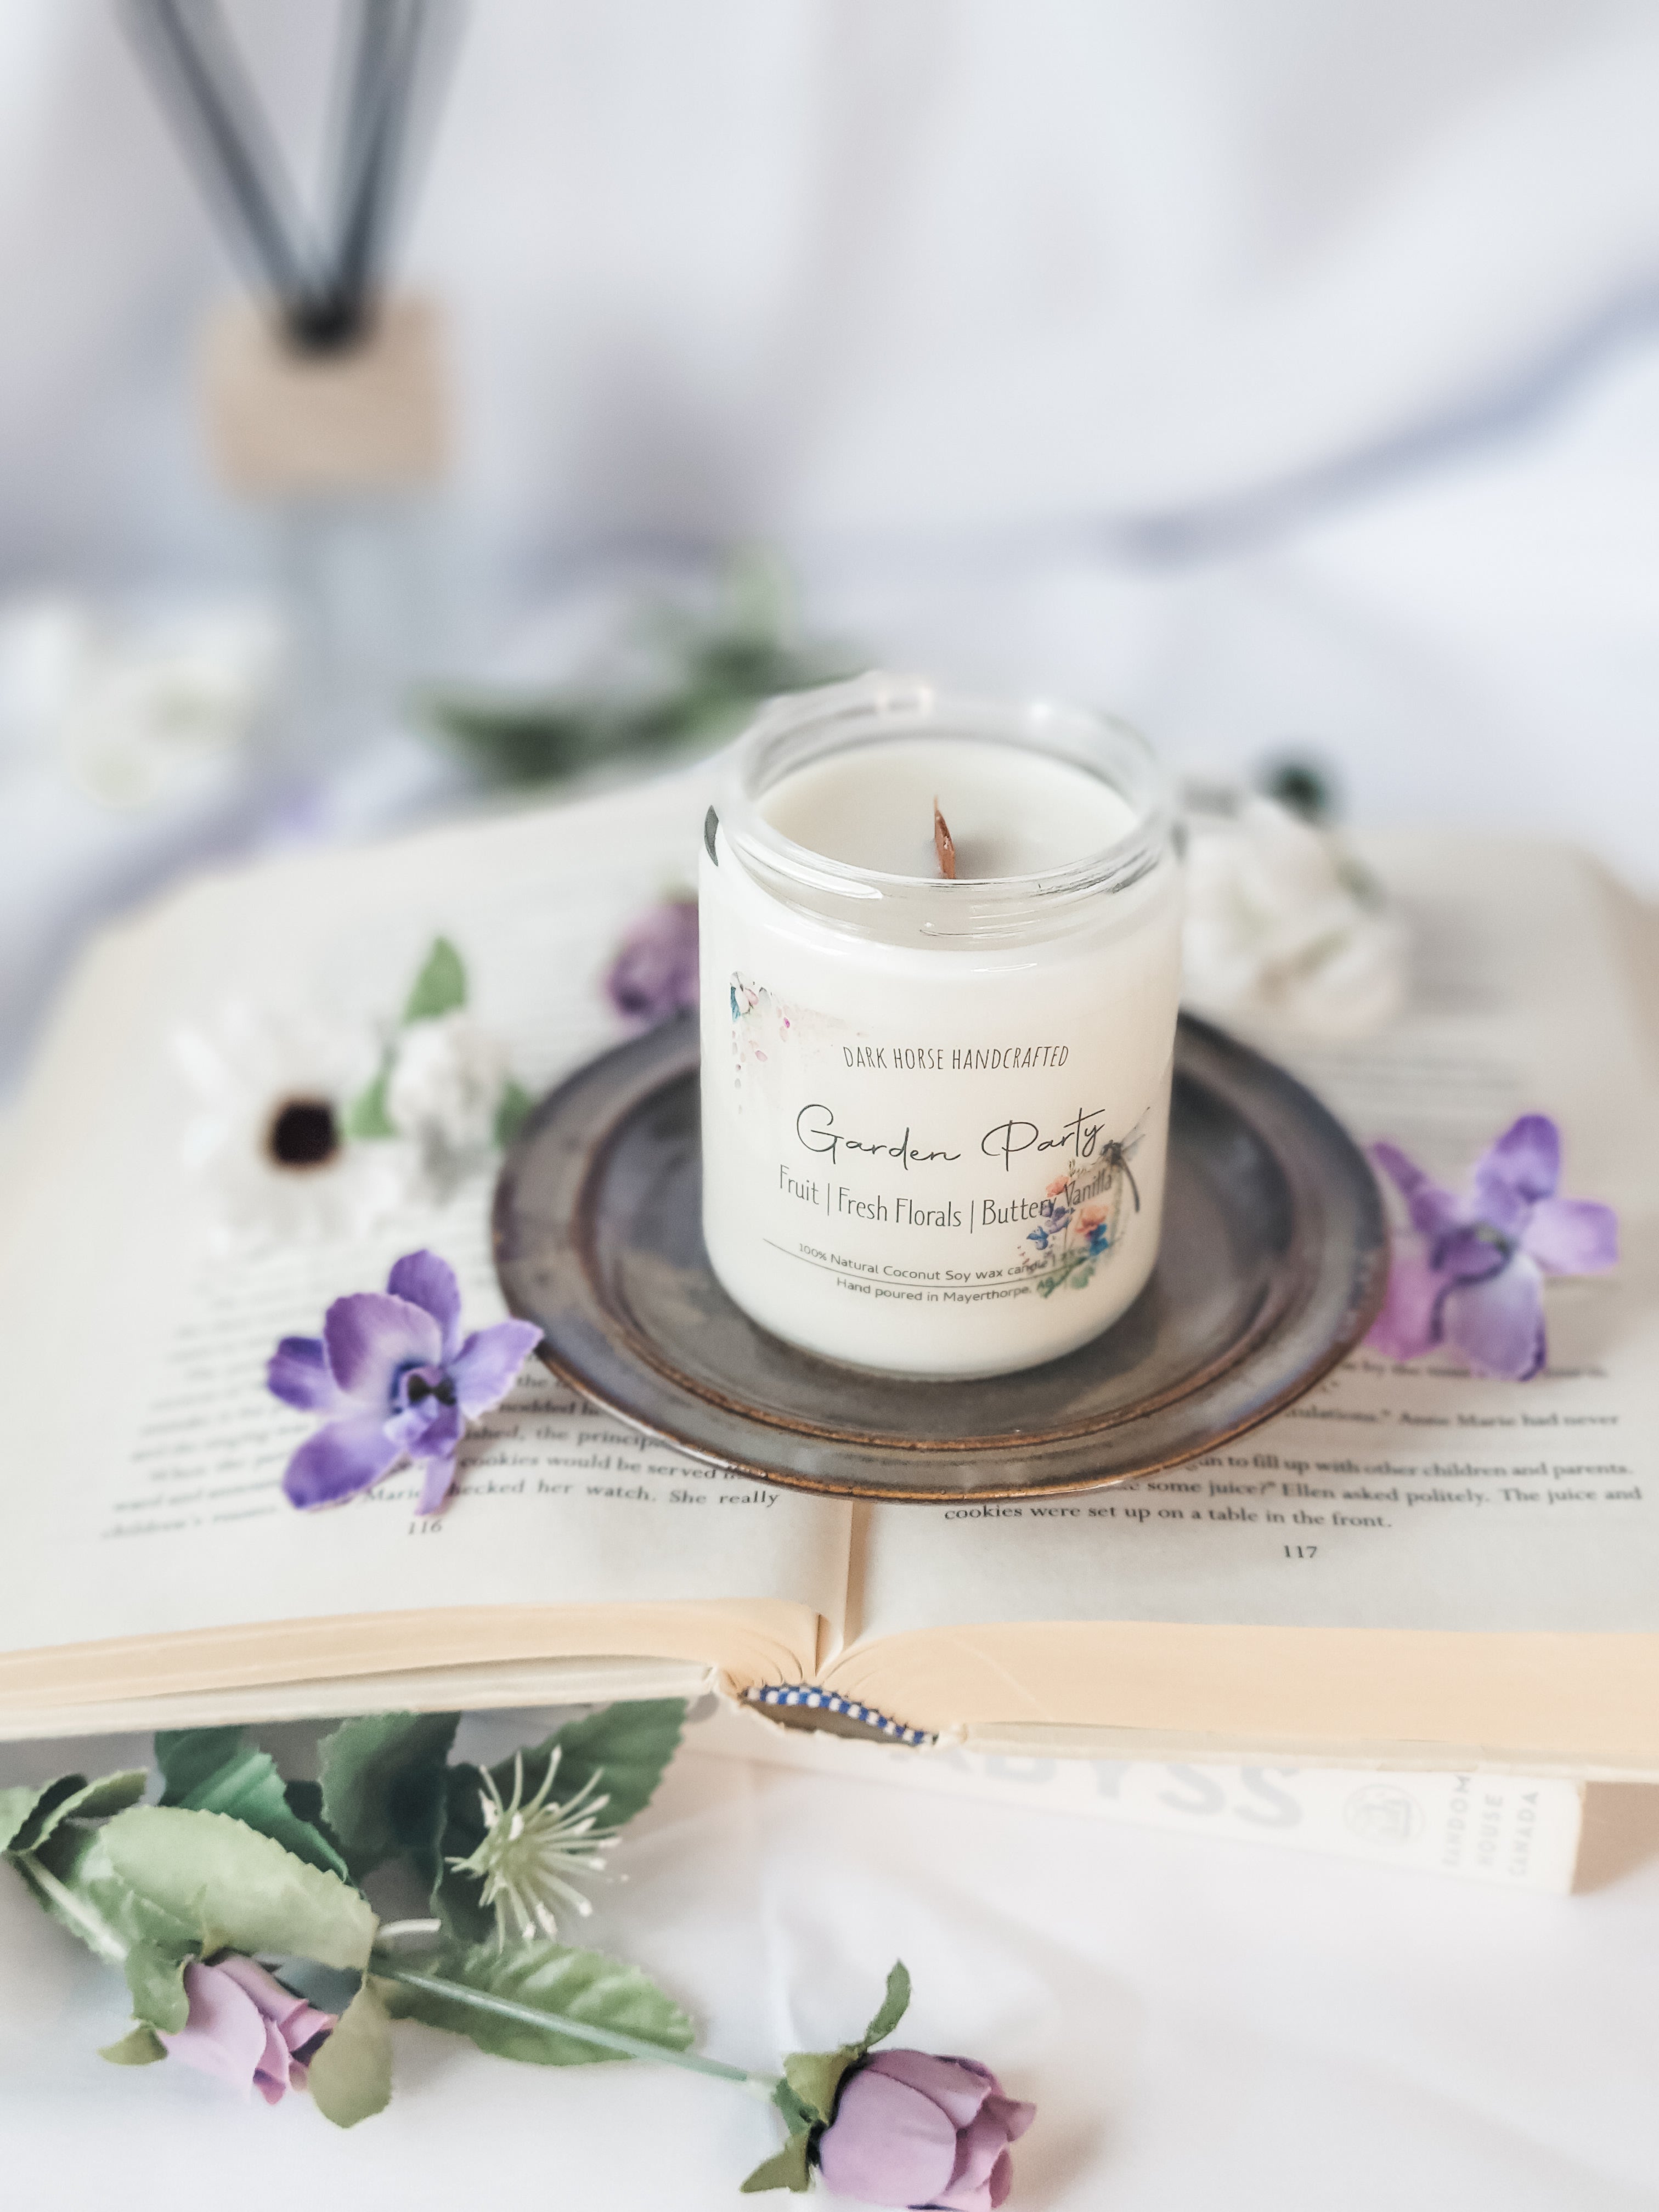 Garden Party - Scented Soy Candle